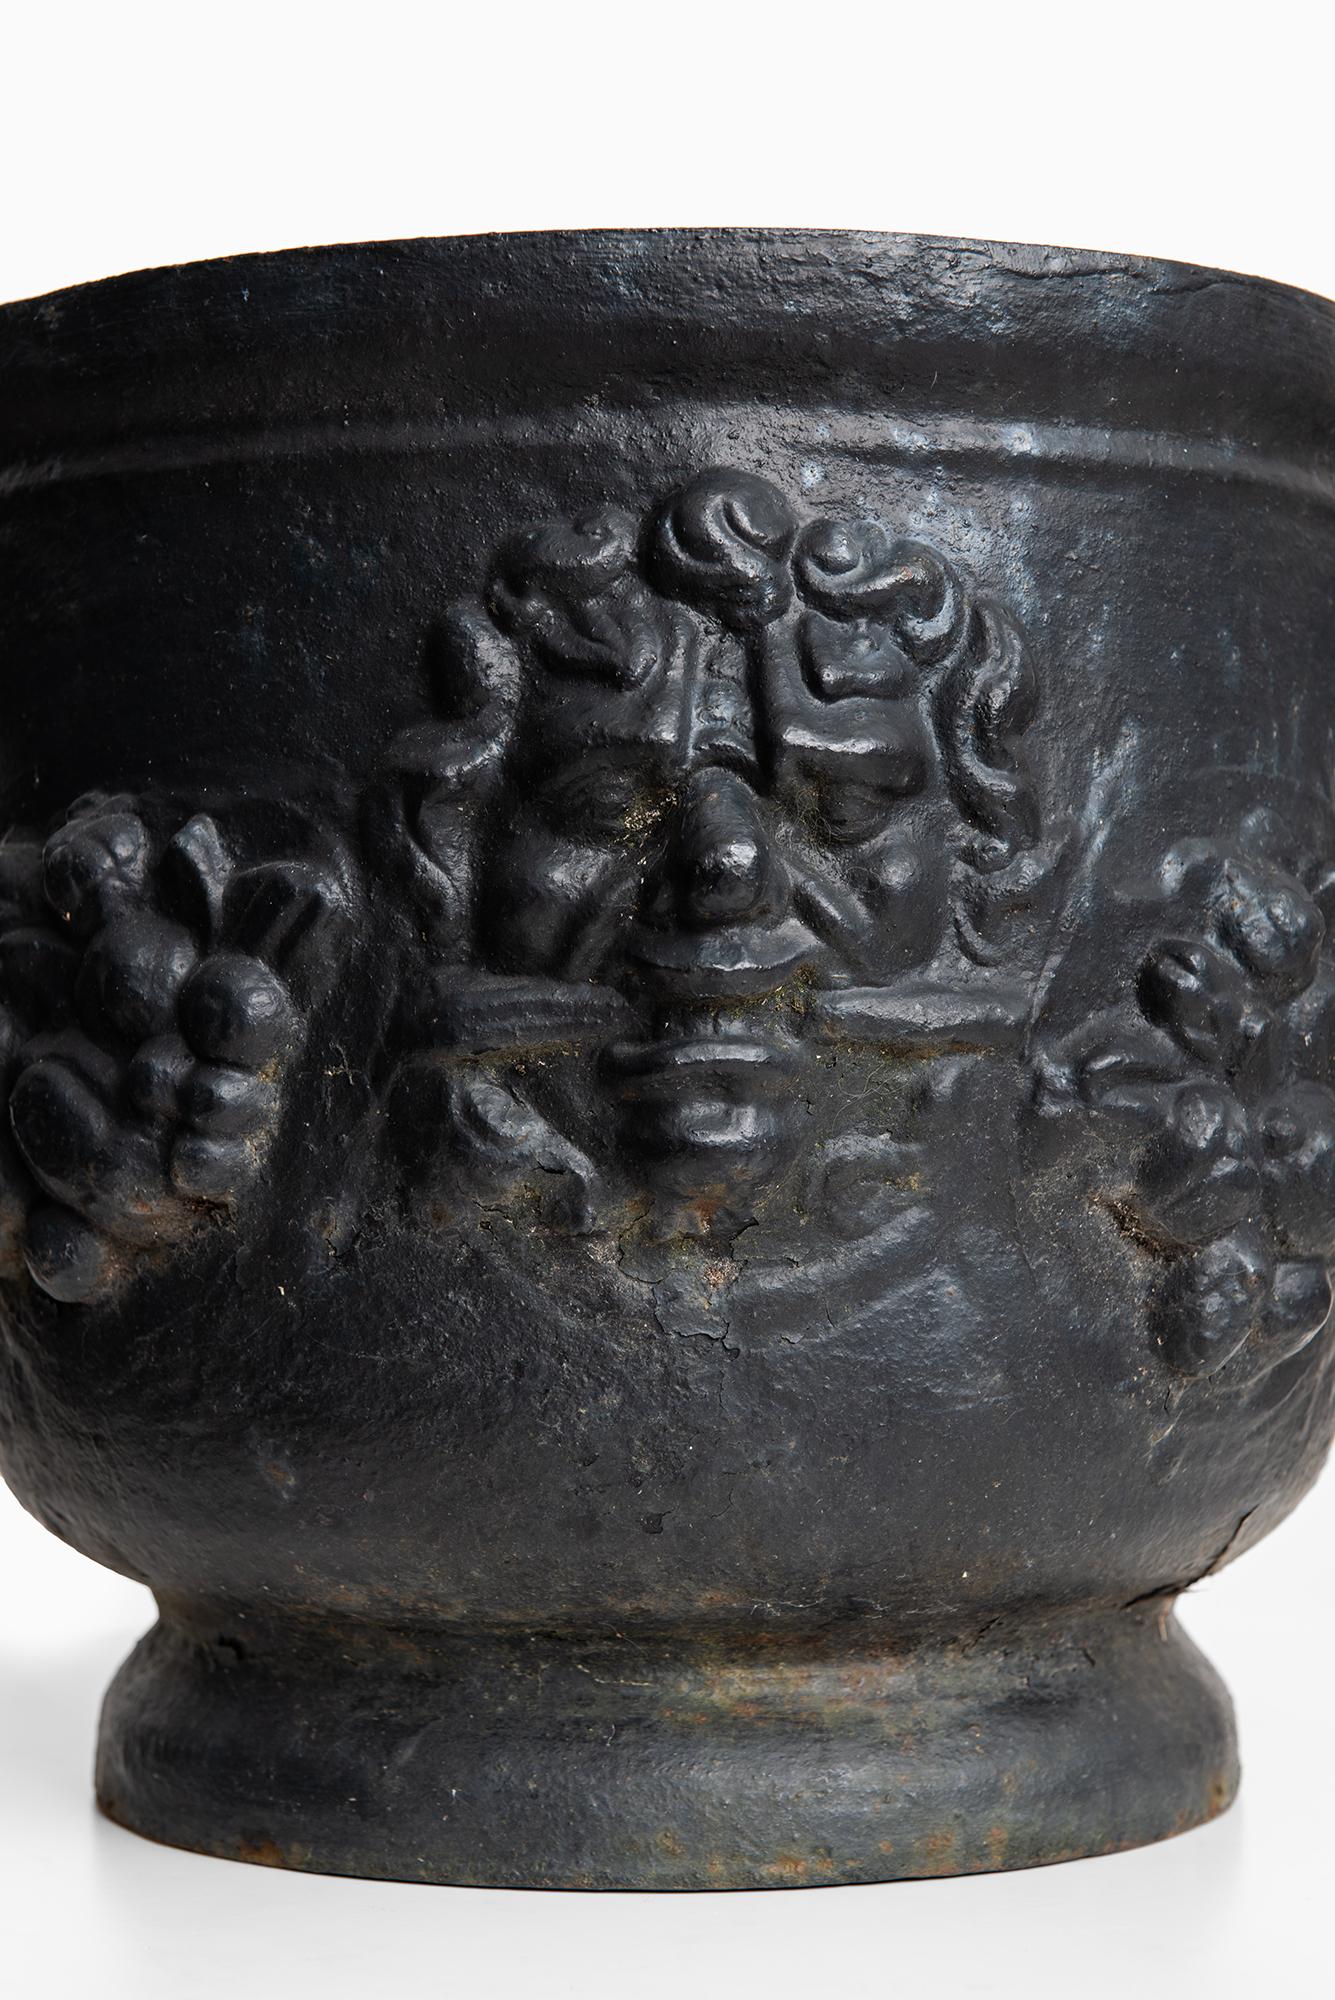 Cast iron urn produced in Sweden.